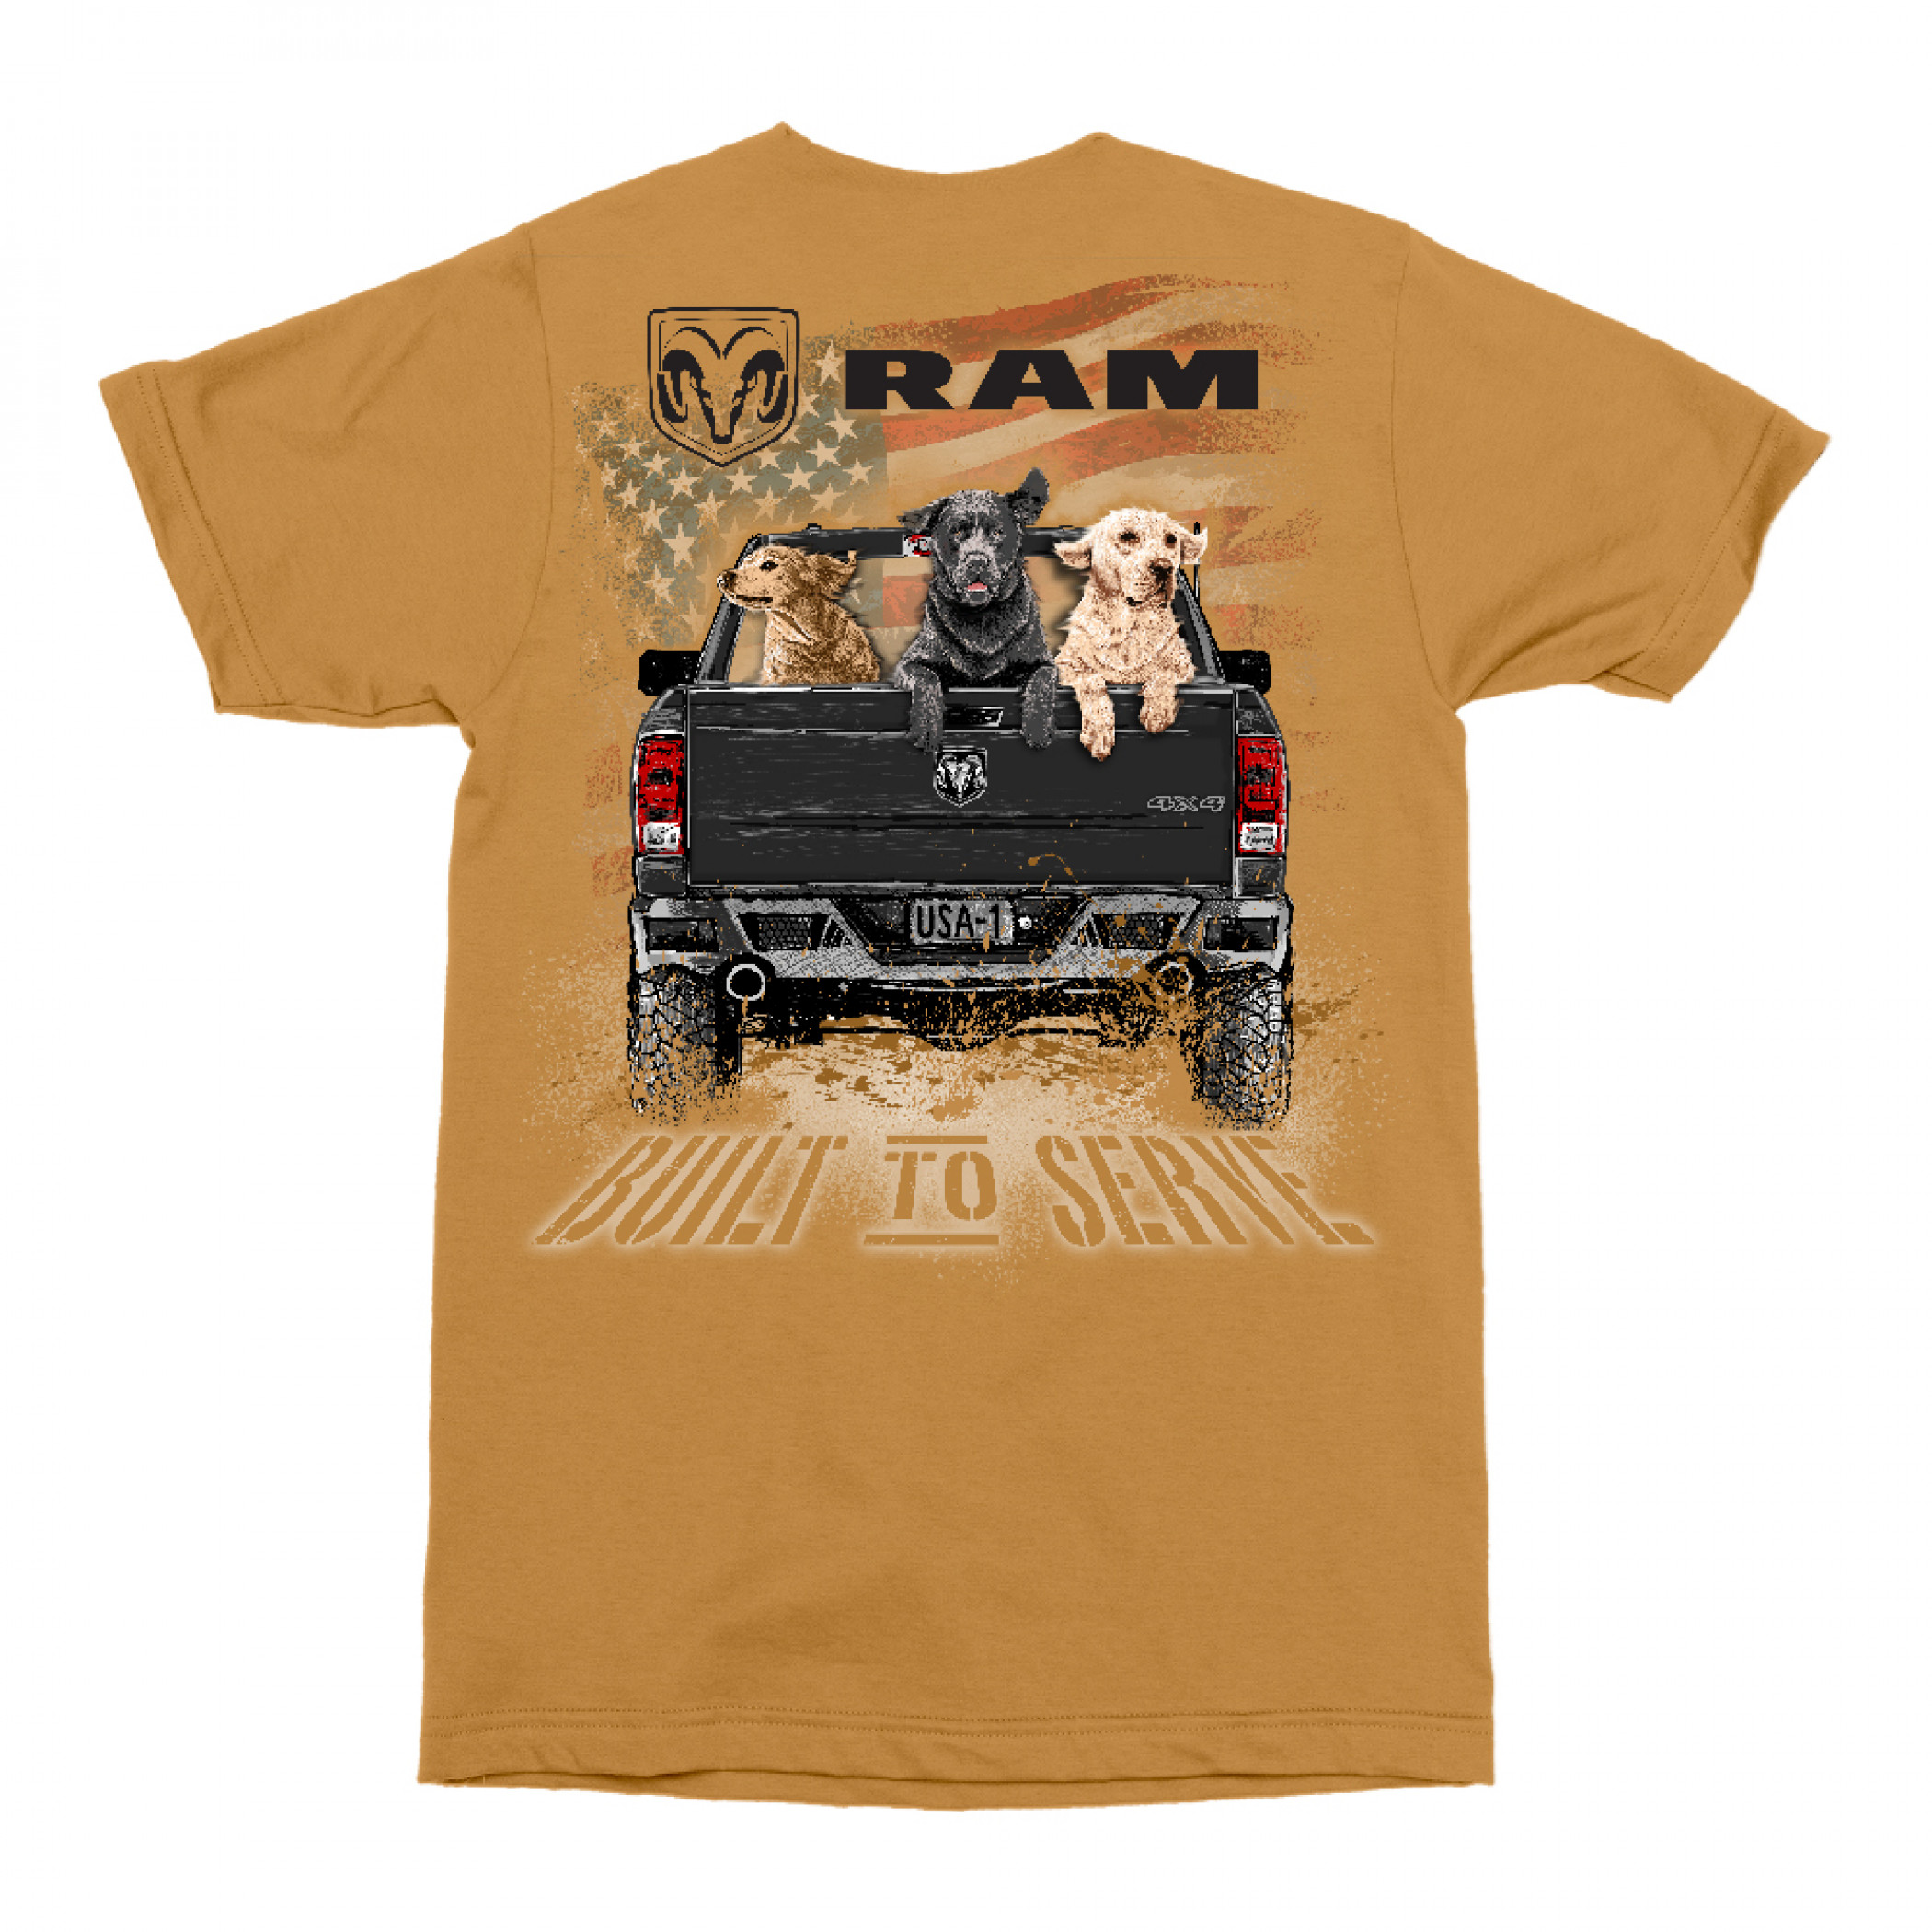 Dodge Ram Built to Serve Front and Back Print T-Shirt